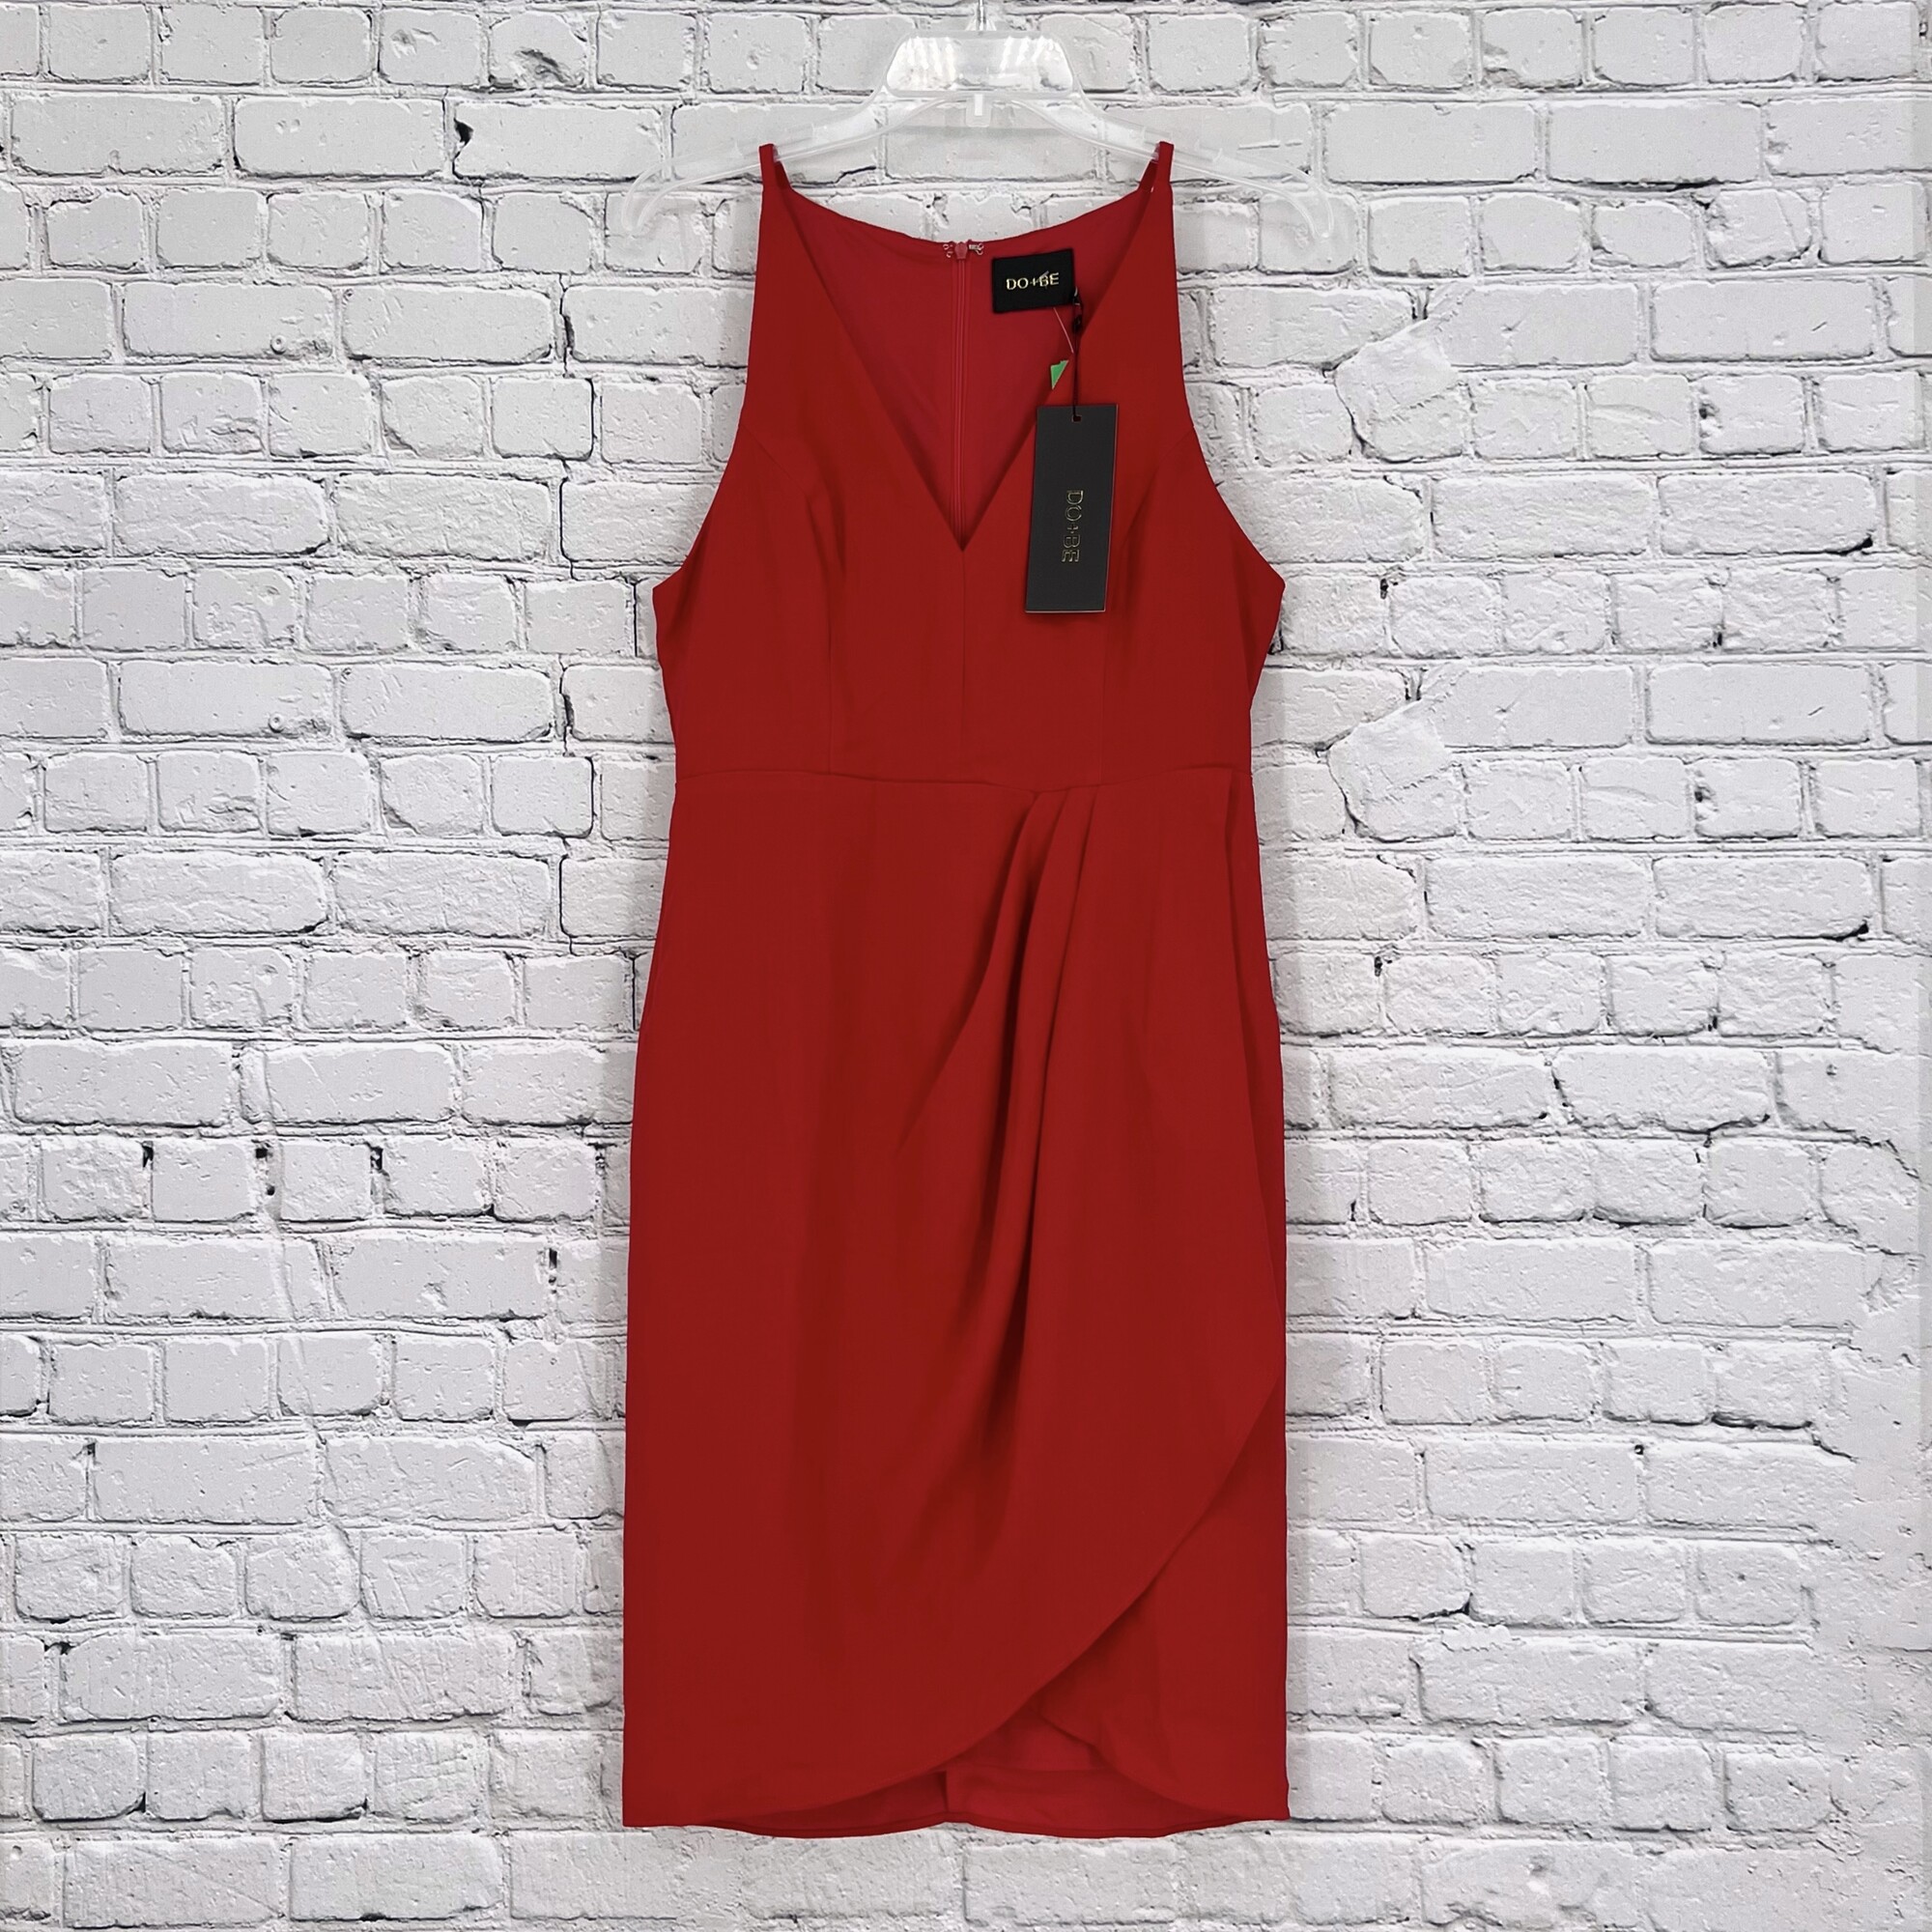 Do + Be Dress NWT, Red, Size: Large